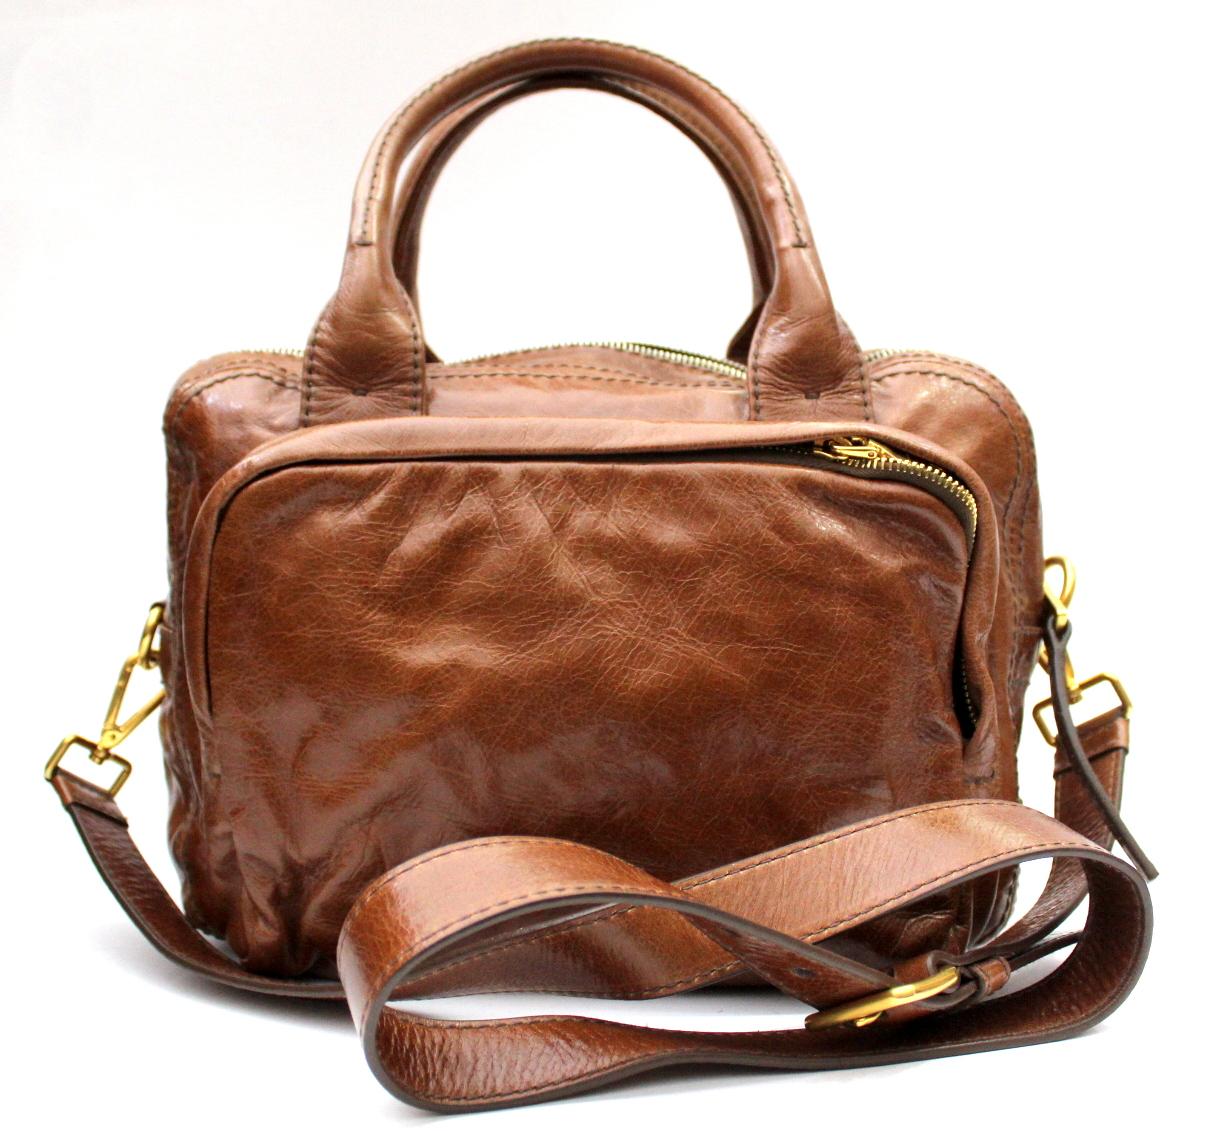 Prada bag made of rosewood-colored calf leather. It is already from three compartments that the answer is very functional. Also equipped with a long adjustable shoulder strap is perfect for everyday use. Very good condition, with card and dustba